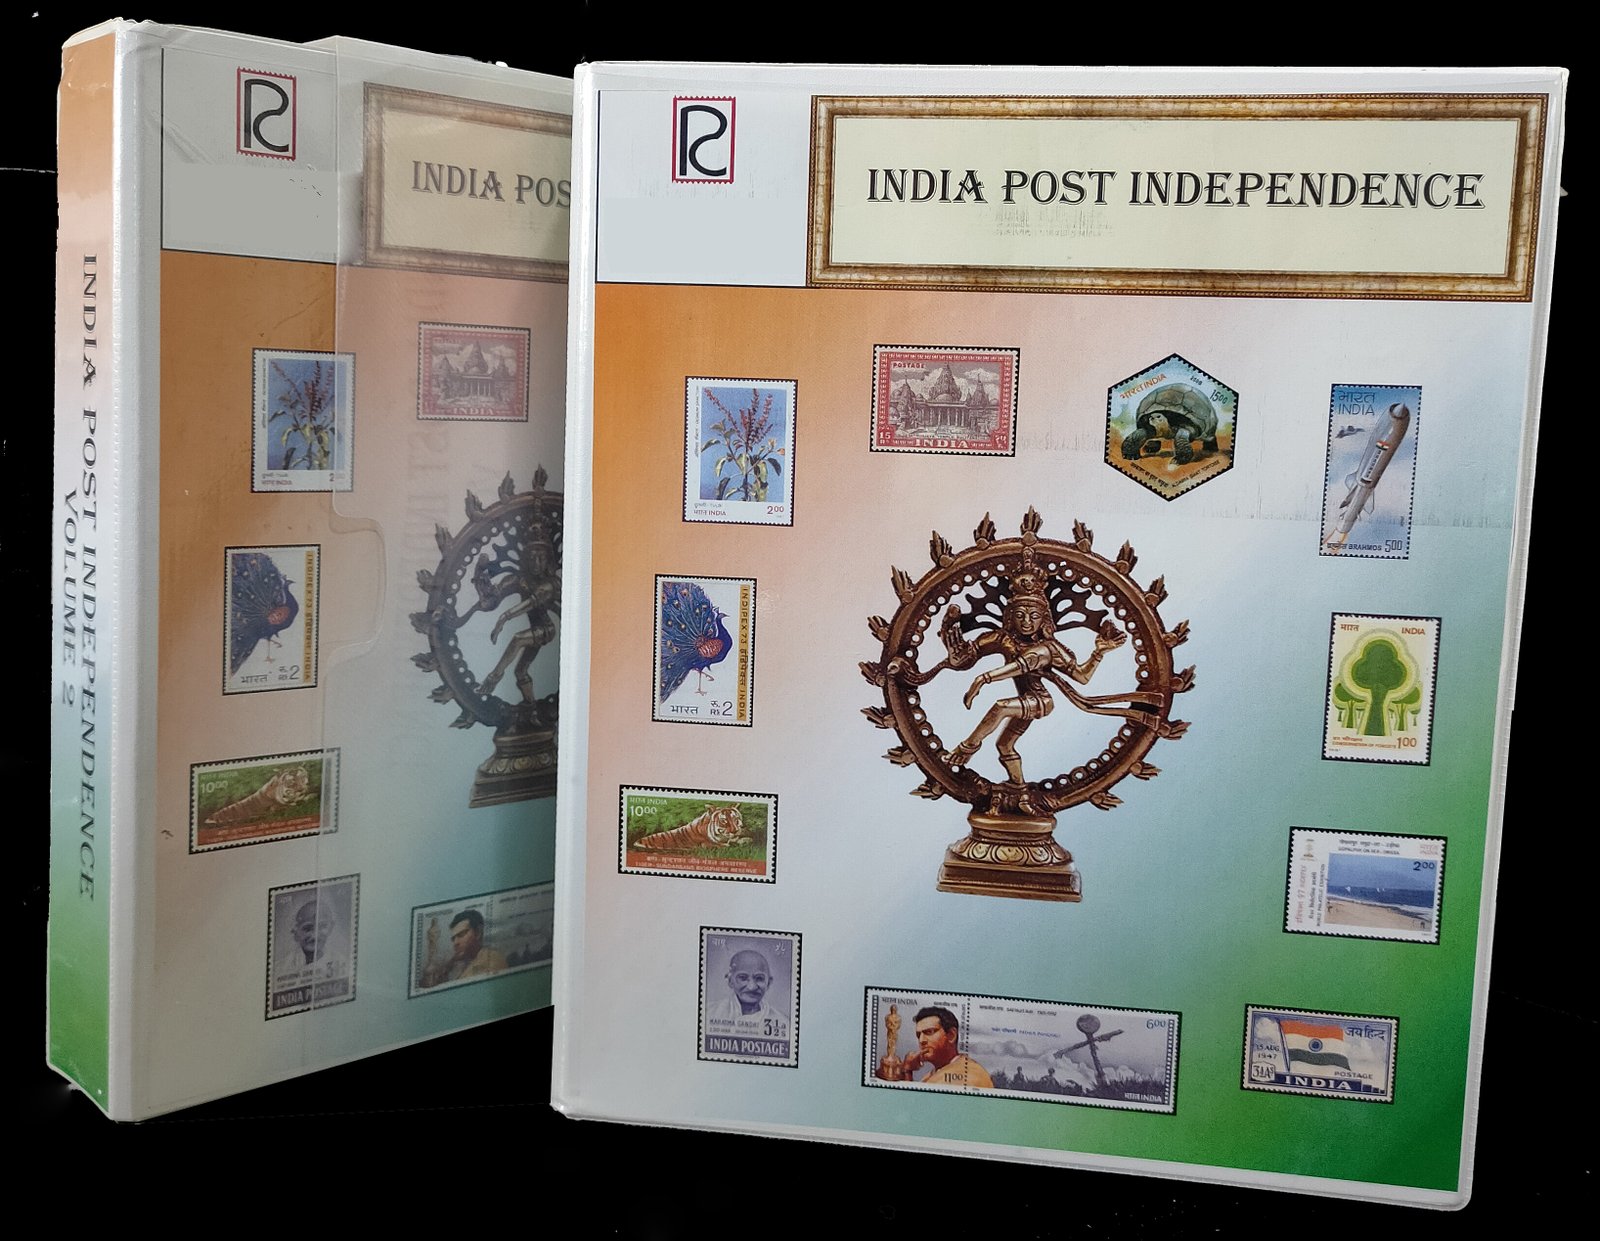 INDIA POST 1947-2019 including Definitive, Military Stamp Official 195 Pages-'B' Series (ALBUM WITH ONLY ILLUSTRATIONS , STAMPS NOT INCLUDED WITH ALBUM)